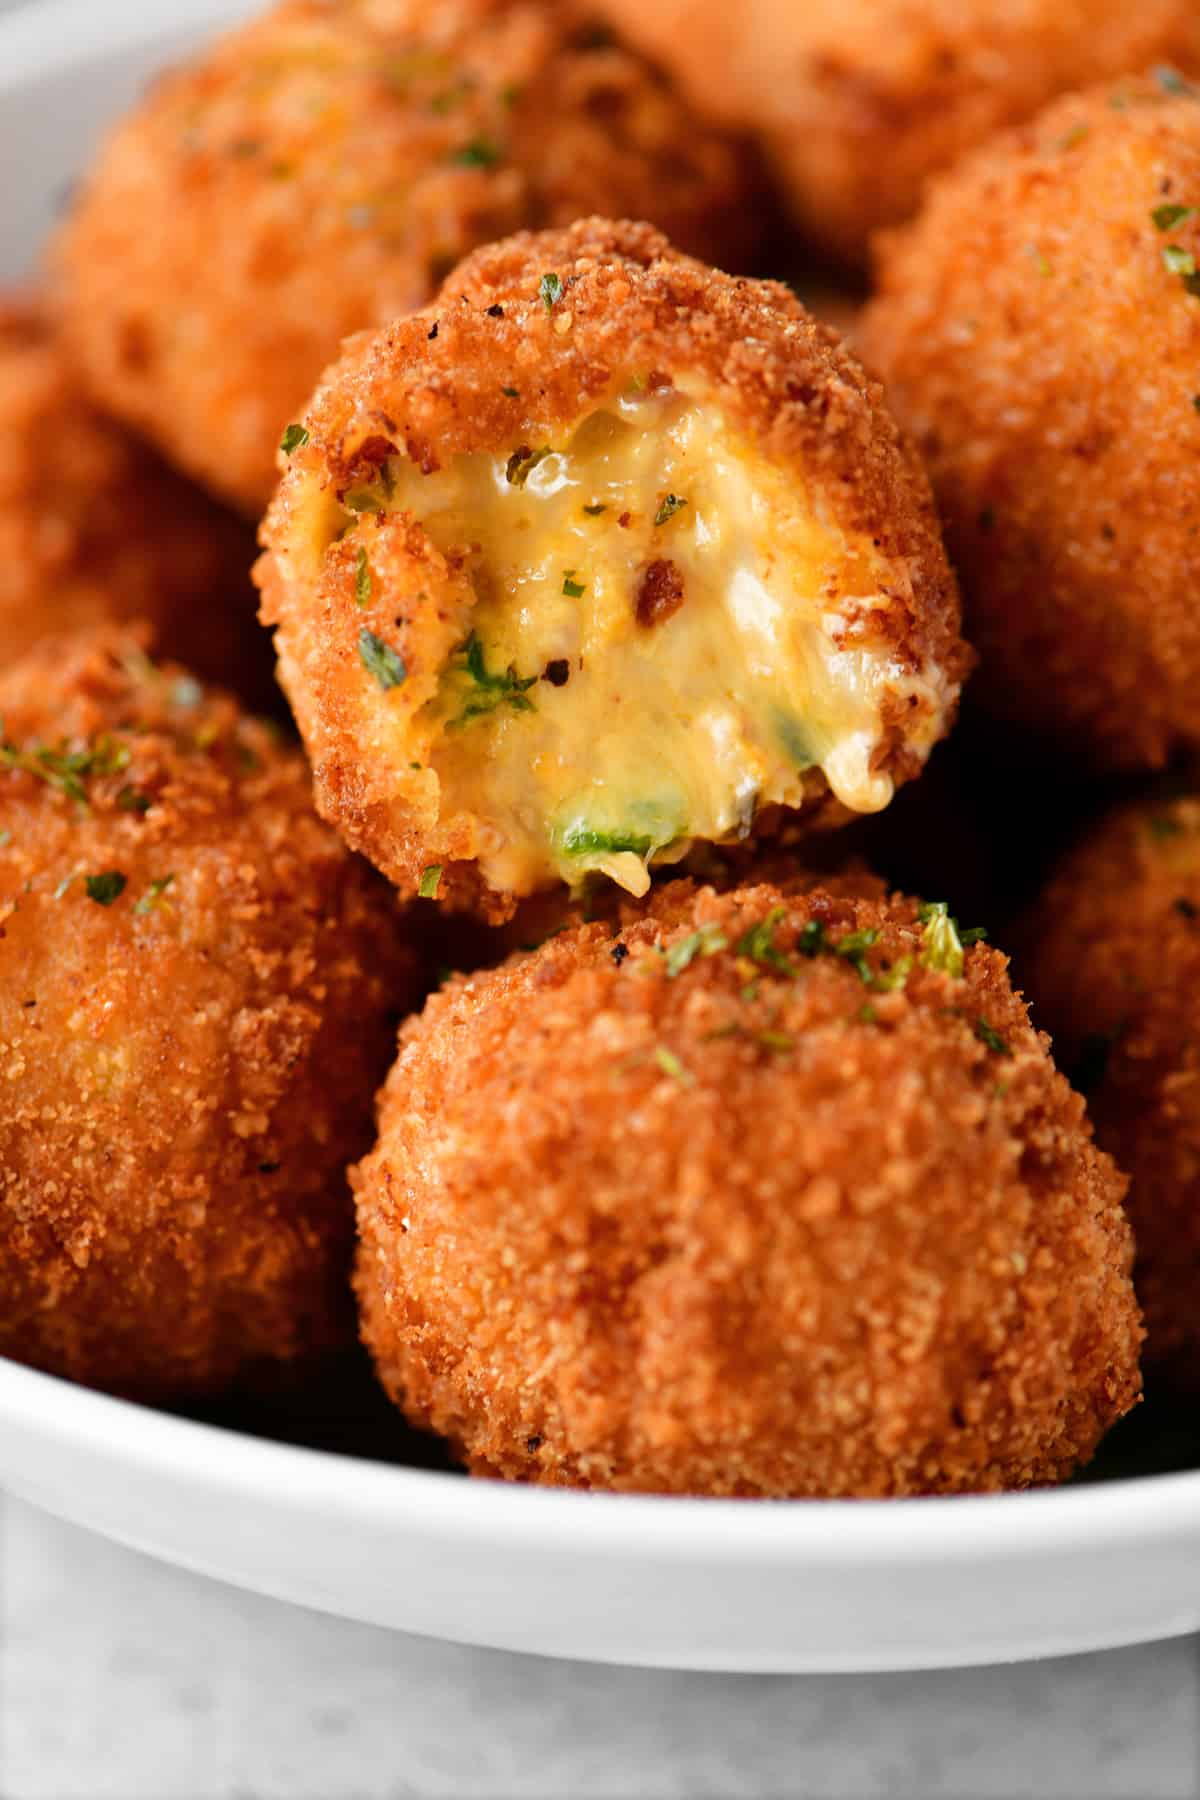 A bowl of cheesy bites covered in breading, they look deep fried, and there are pieces of jalapenos and bacon in them.